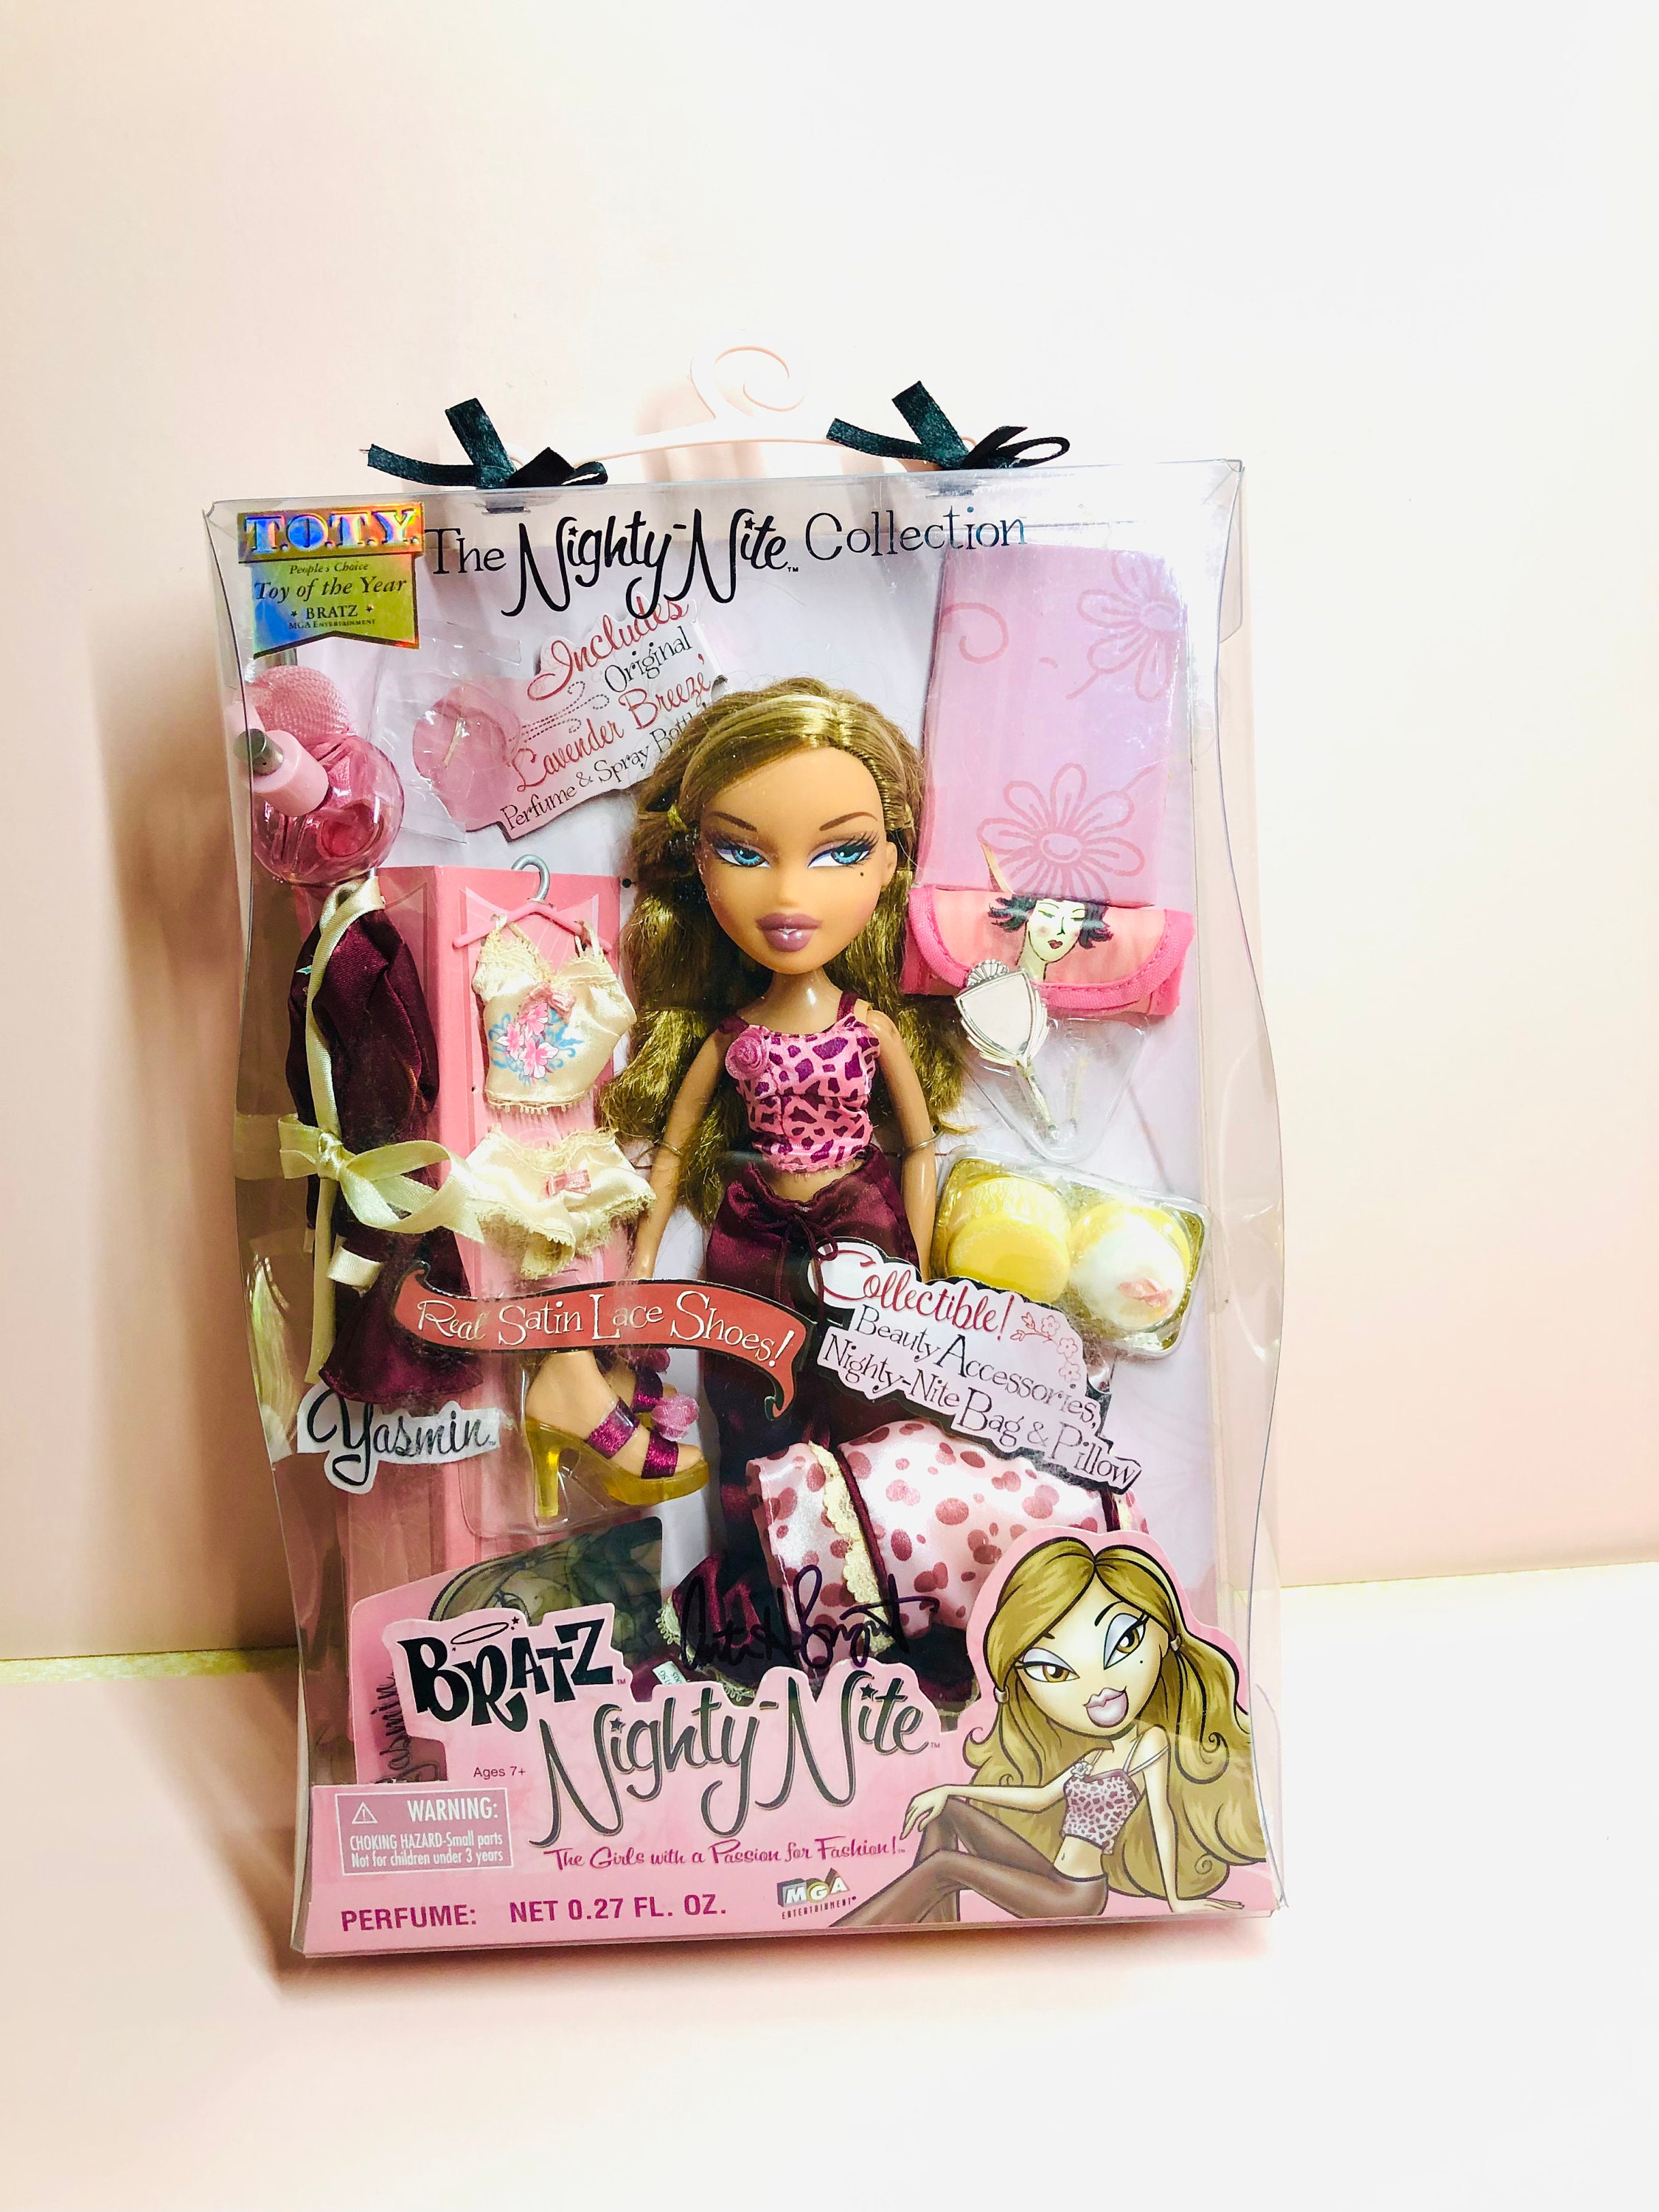 Bratz Nighty-Nite Yasmin! Original 2004 edition. Autographed by Bratz  creator Carter Bryant, from his own collection.